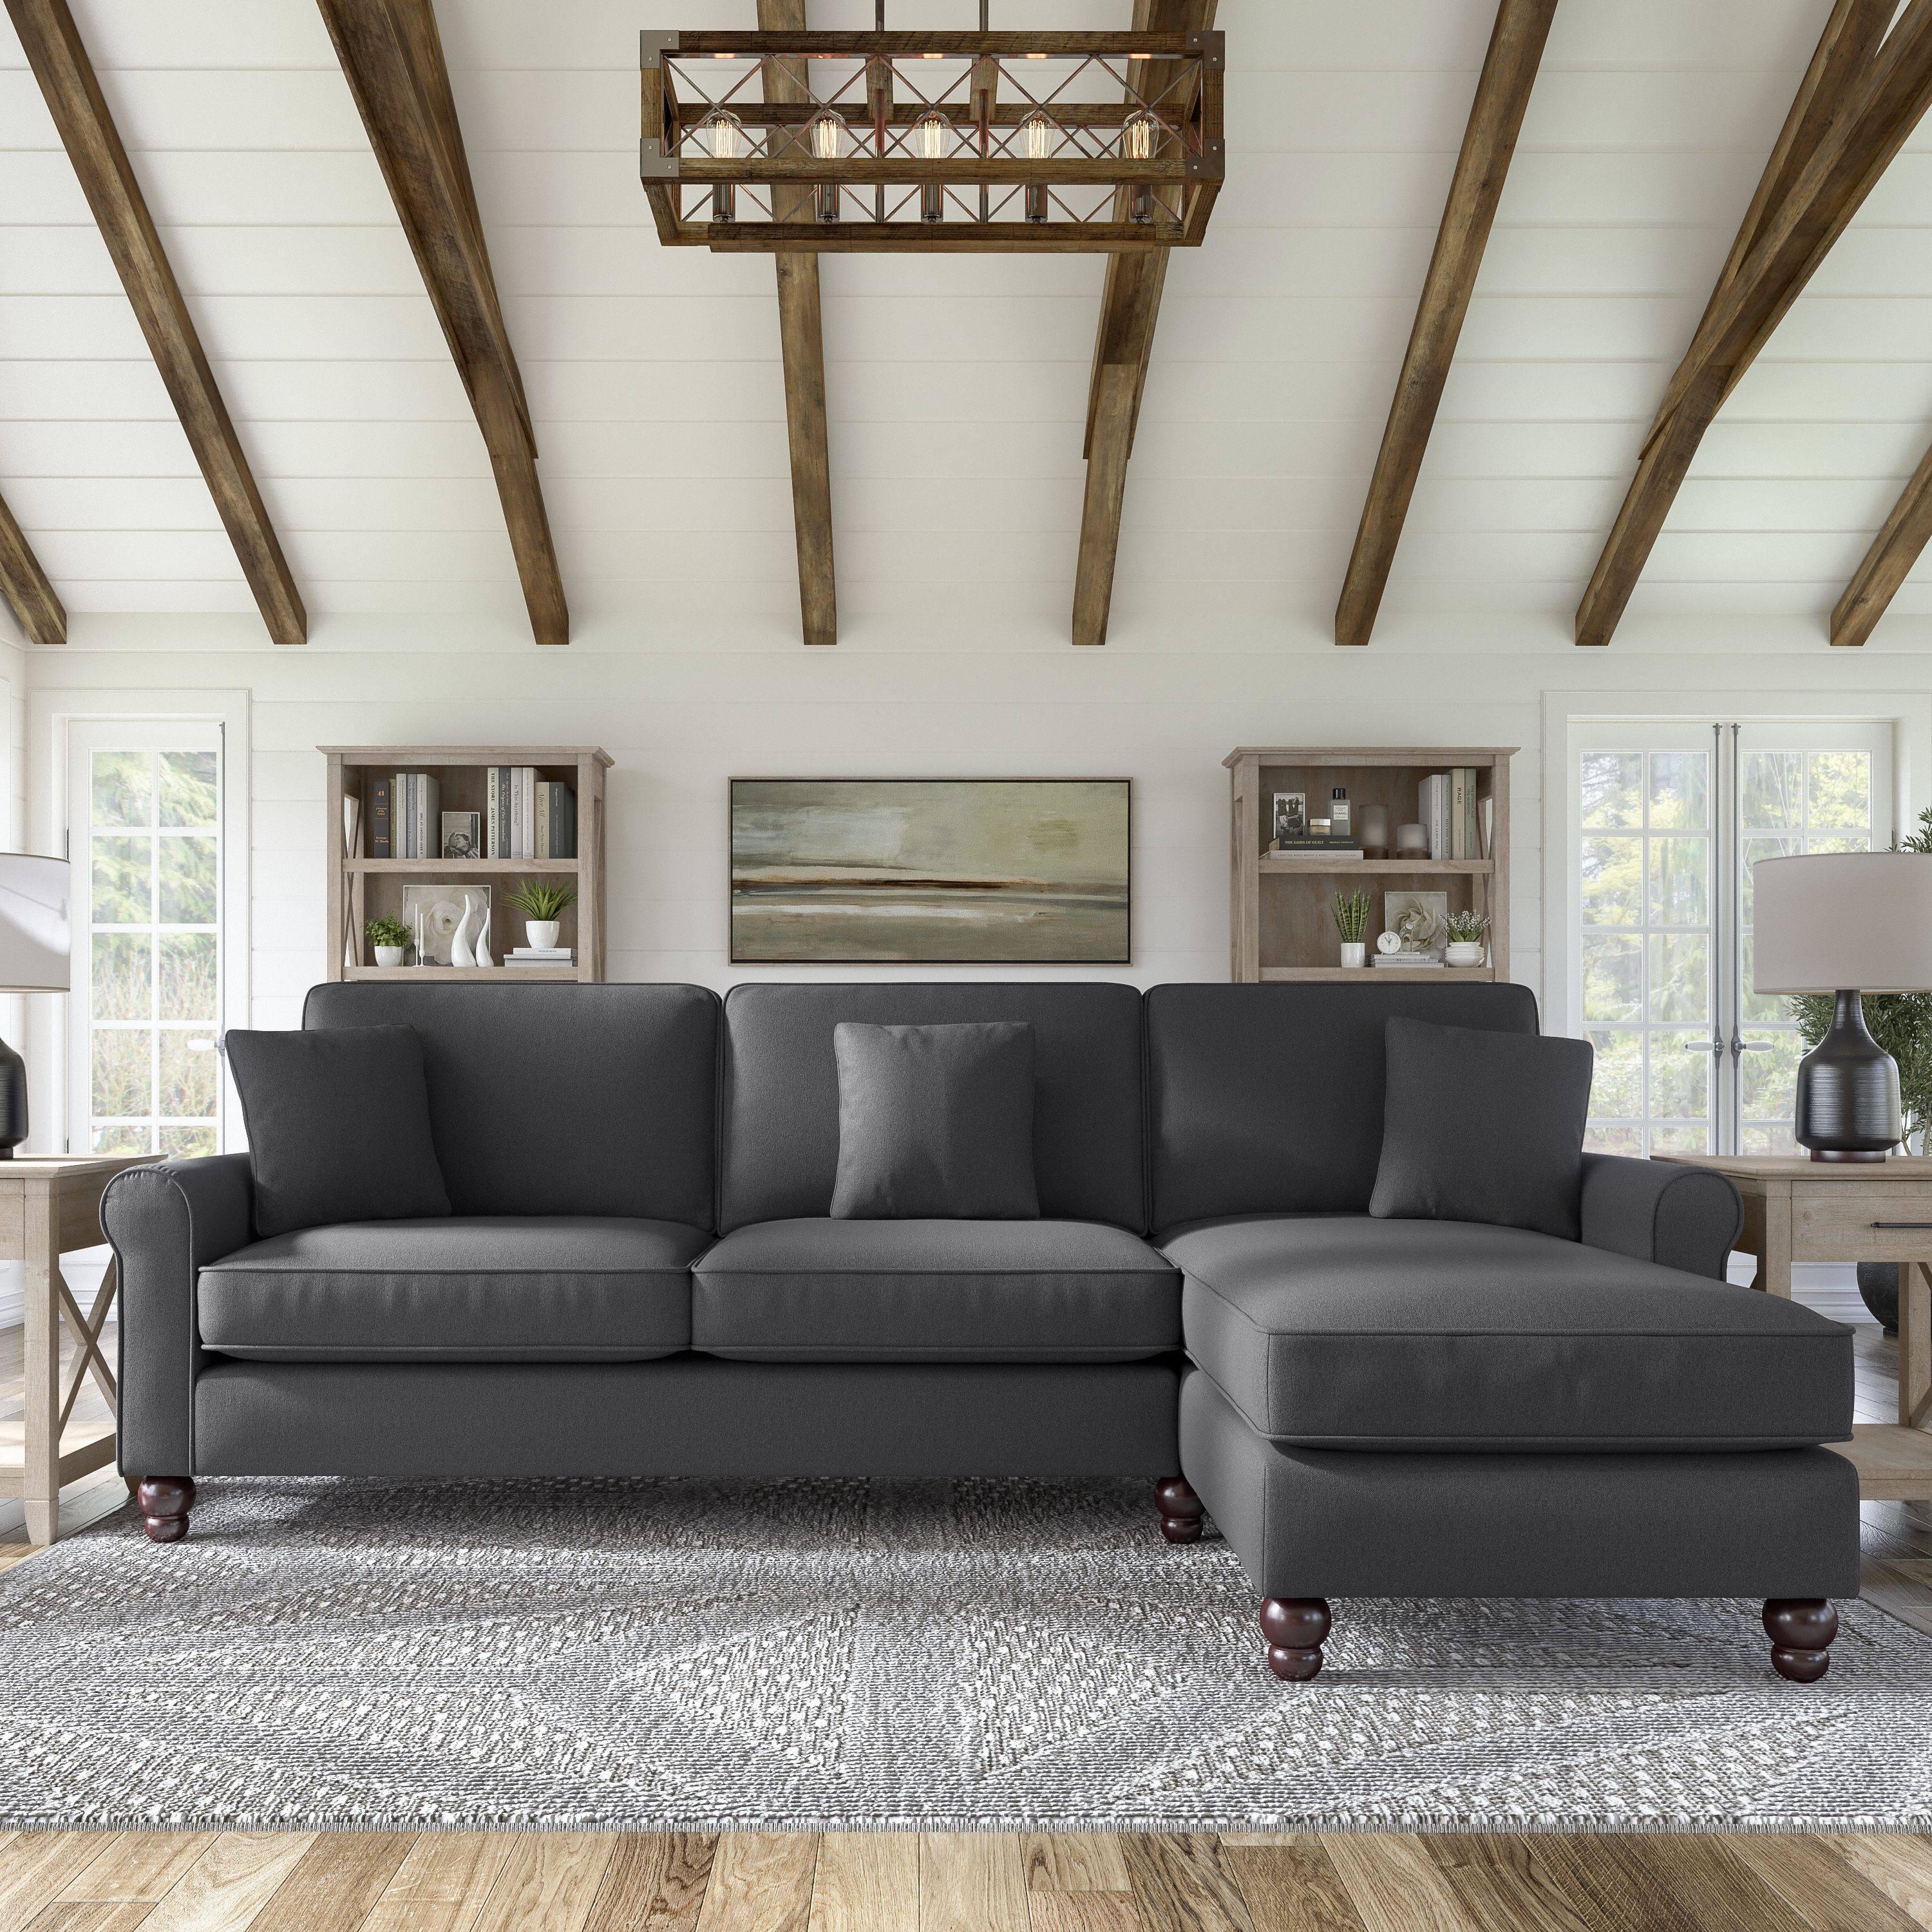 Shop Bush Furniture Hudson 102W Sectional Couch with Reversible Chaise Lounge 01 HDY102BCGH-03K #color_charcoal gray herringbone fabr